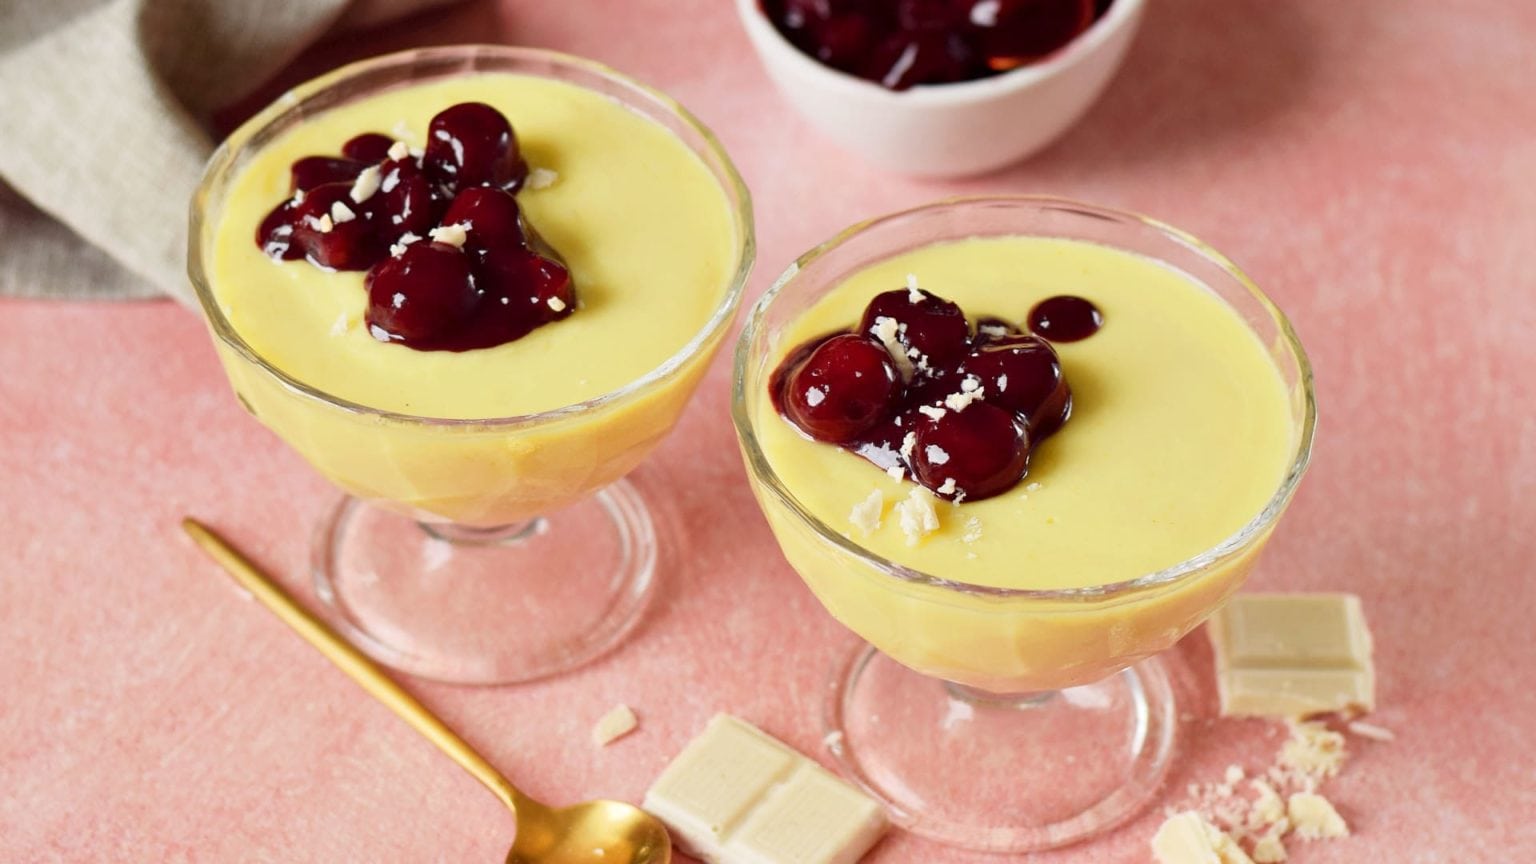 fruit cocktail and vanilla pudding recipe